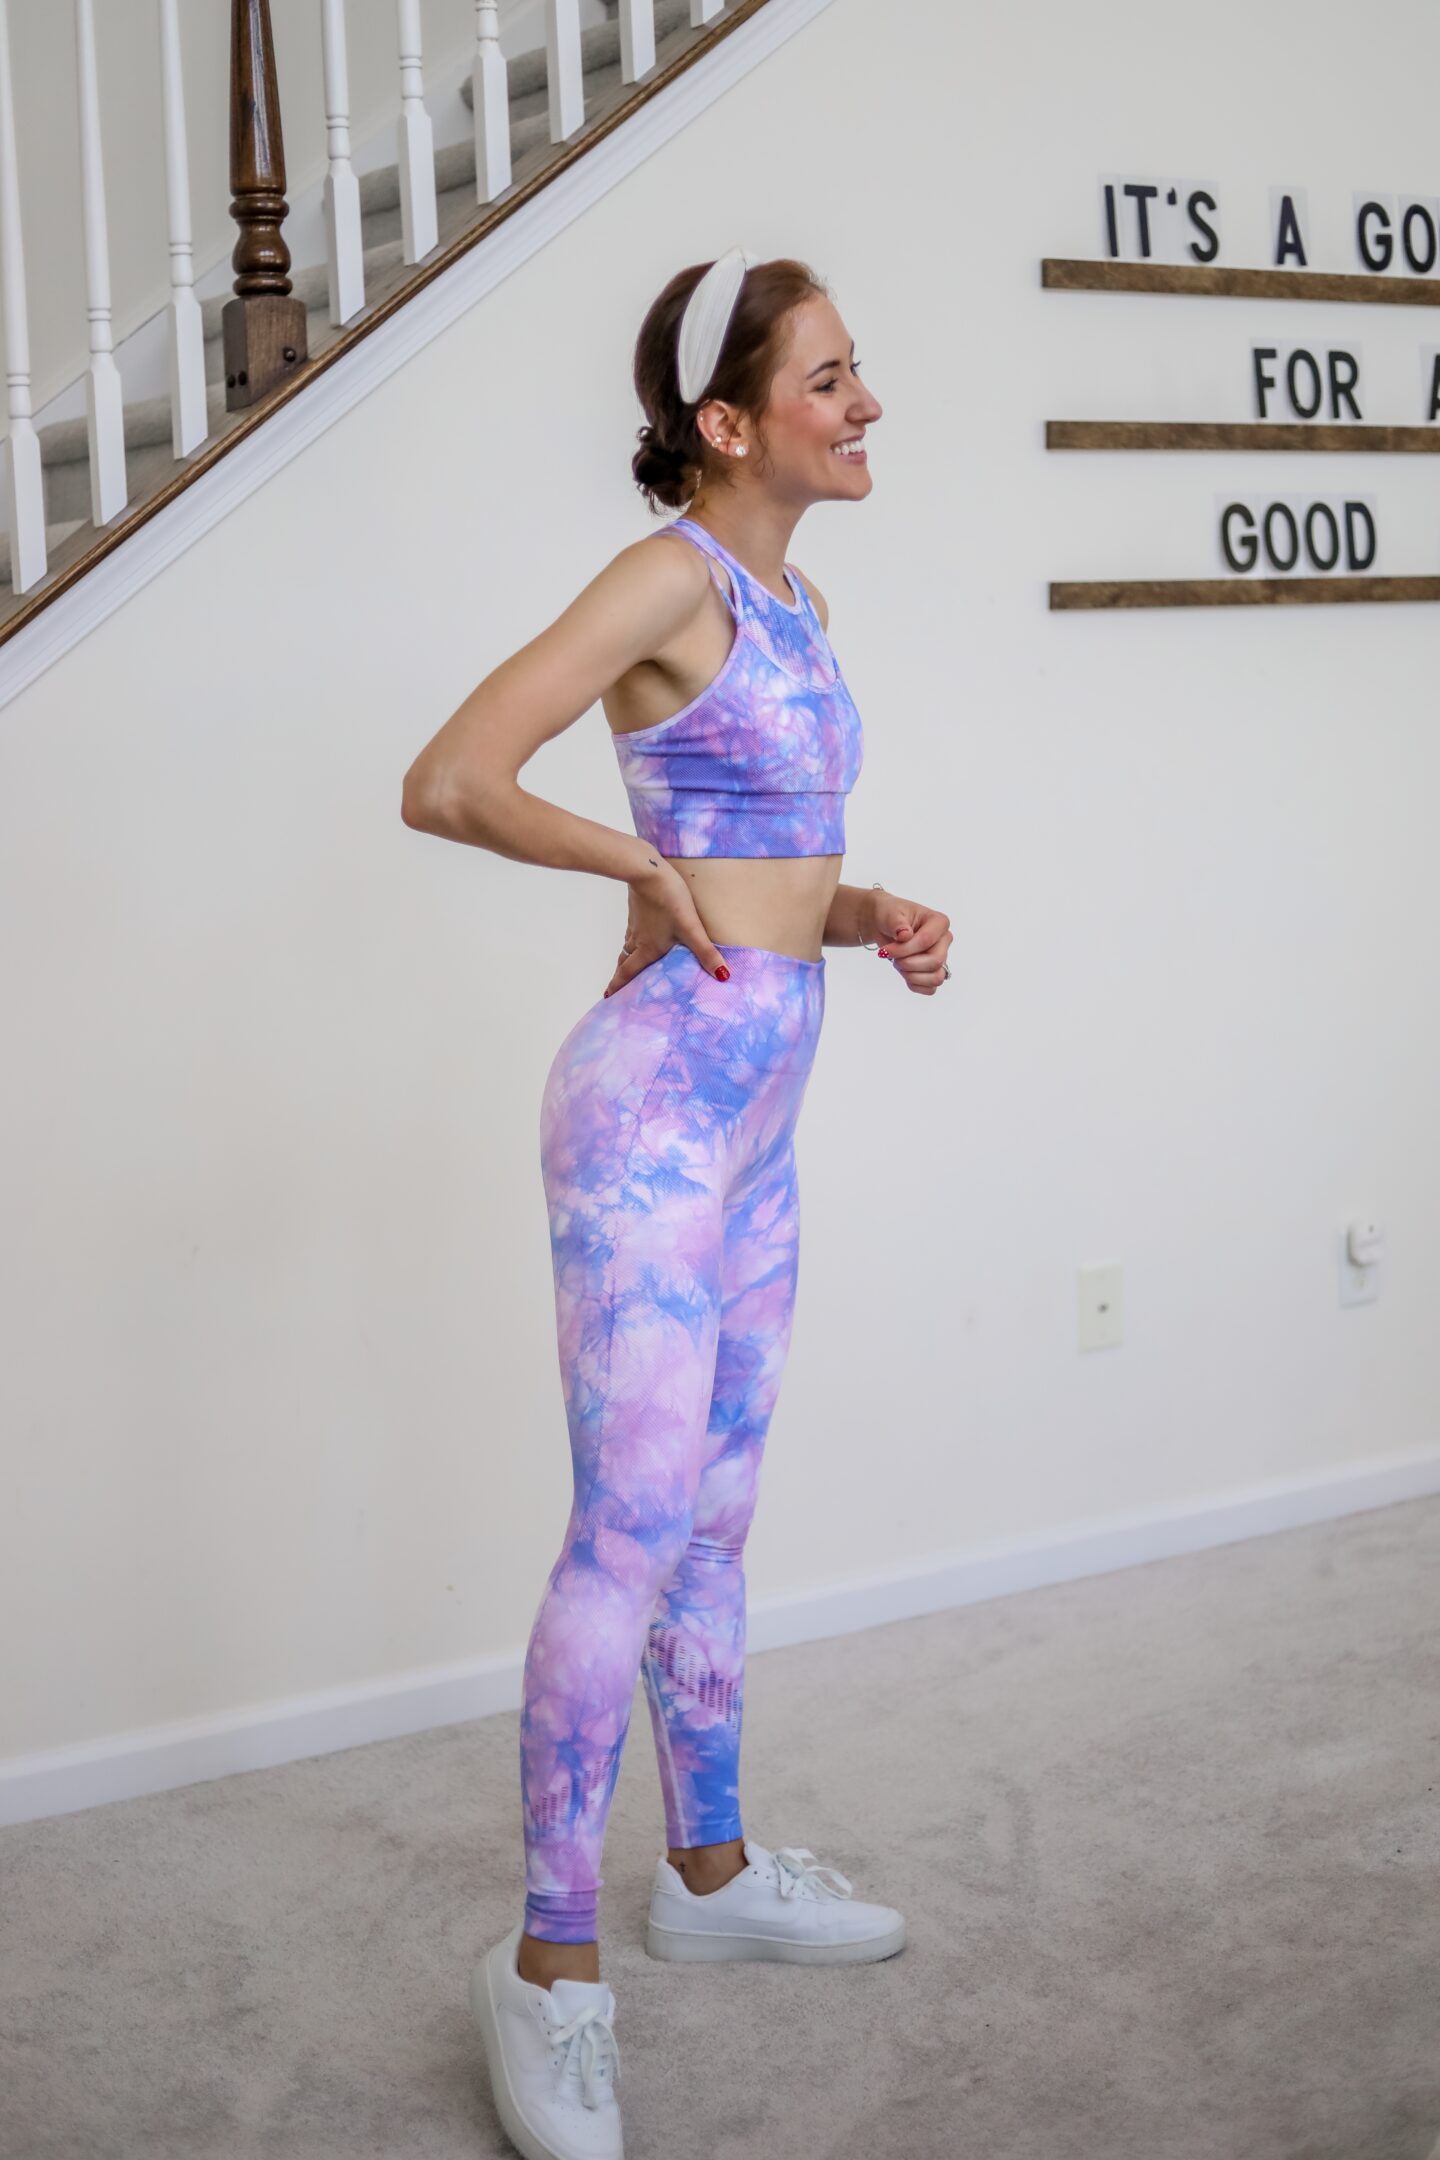 COOL SH*T I LOVELOVELOVE - Monthly Favorites, June 2022 on Coming Up Roses (tie dye athletic set)